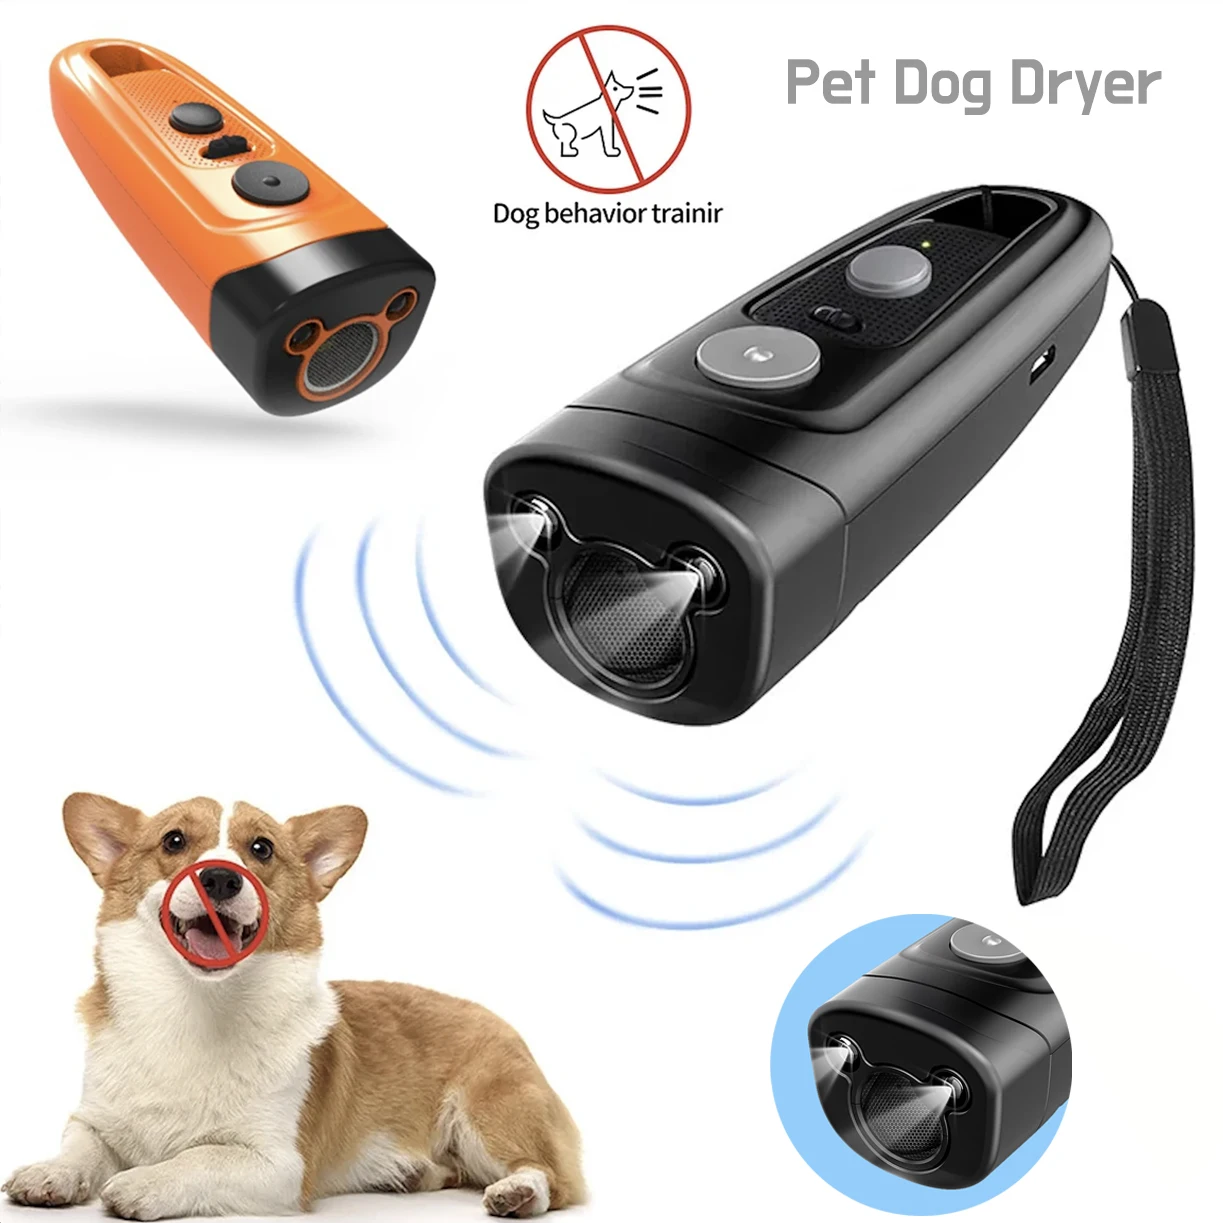 

2 in 1 Ultrasonic Dog Repeller with Flashlight Training Aids and Behavior for Dogs Rechargeable Anti-bark Control Puppy Supplies